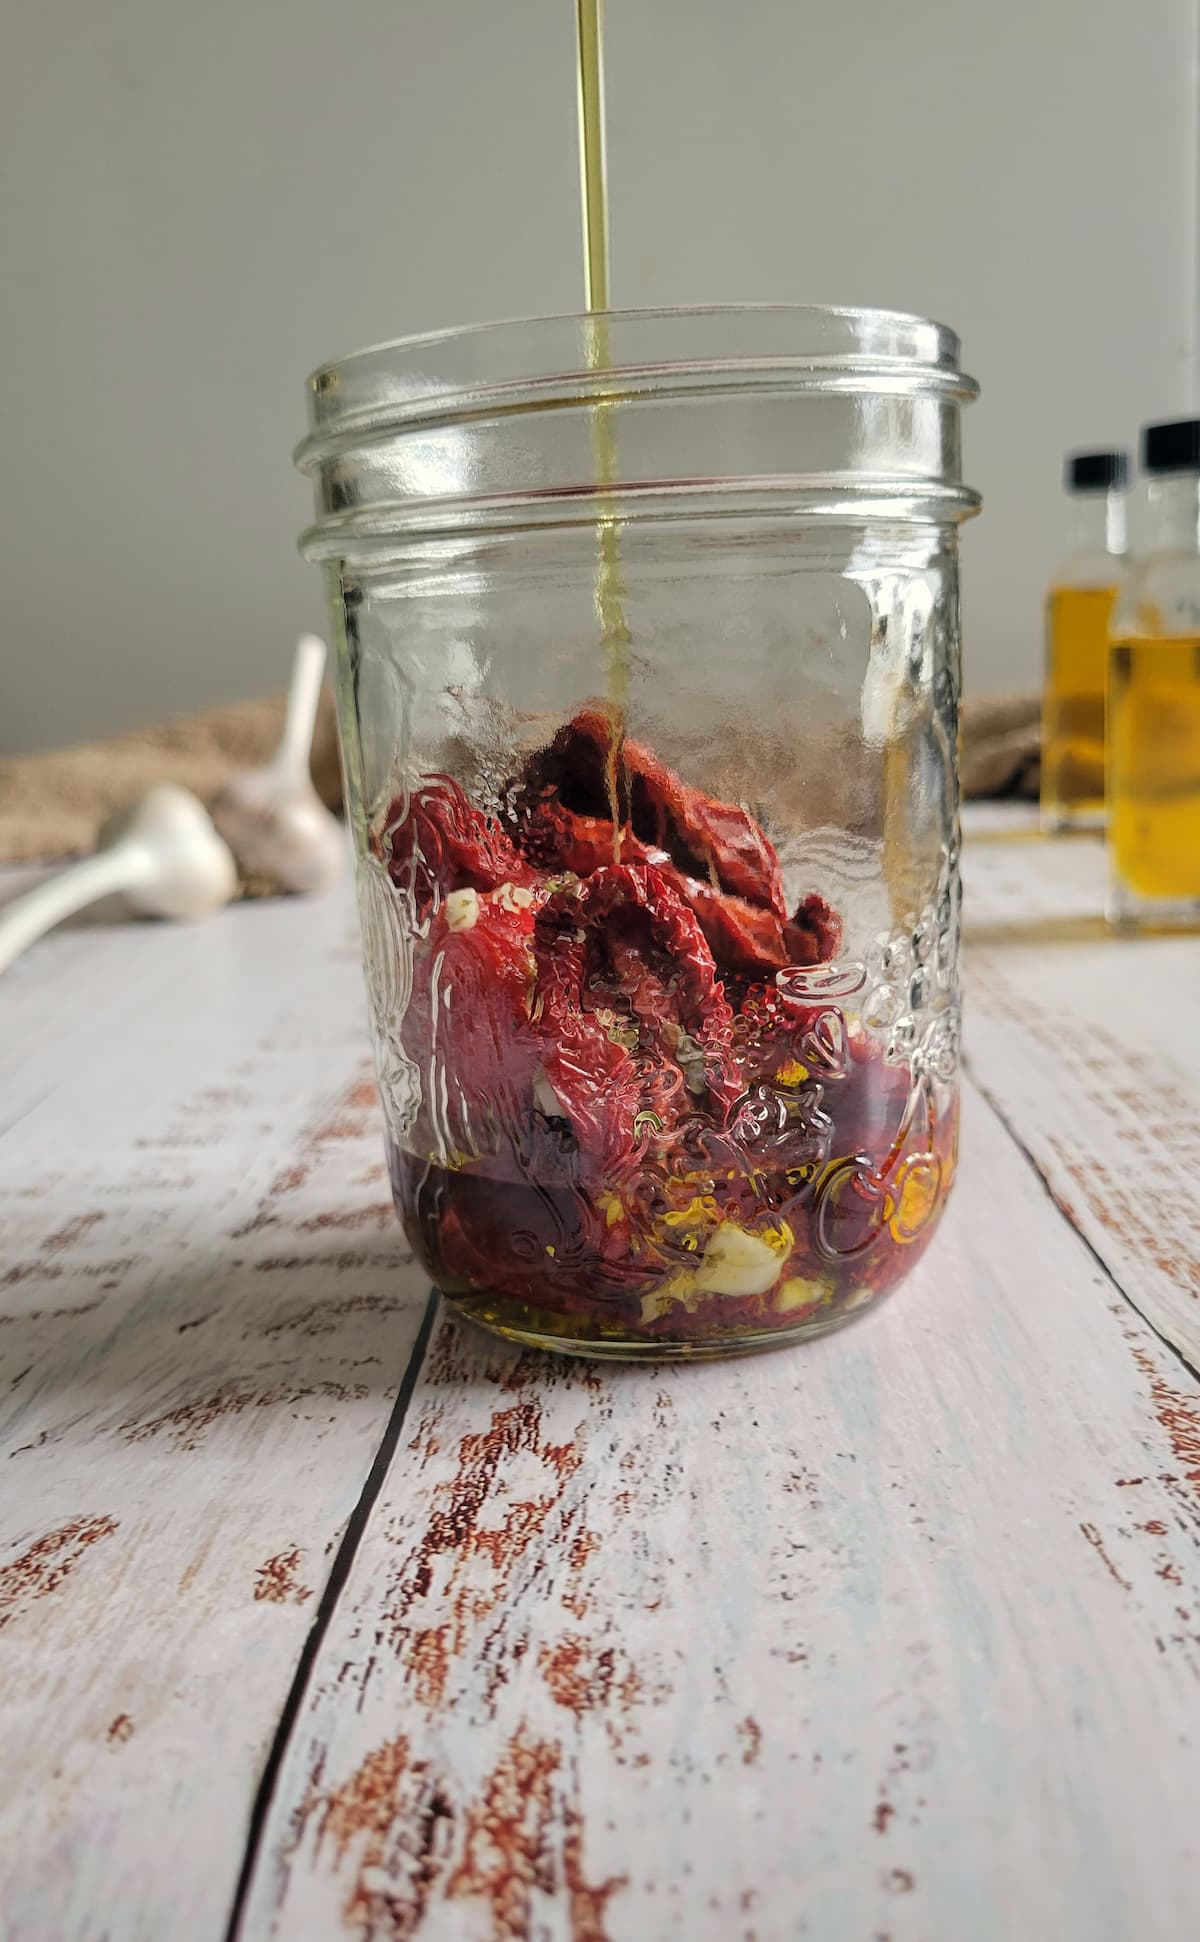 oil being poured into a jar with sun dried tomatoes and garlic